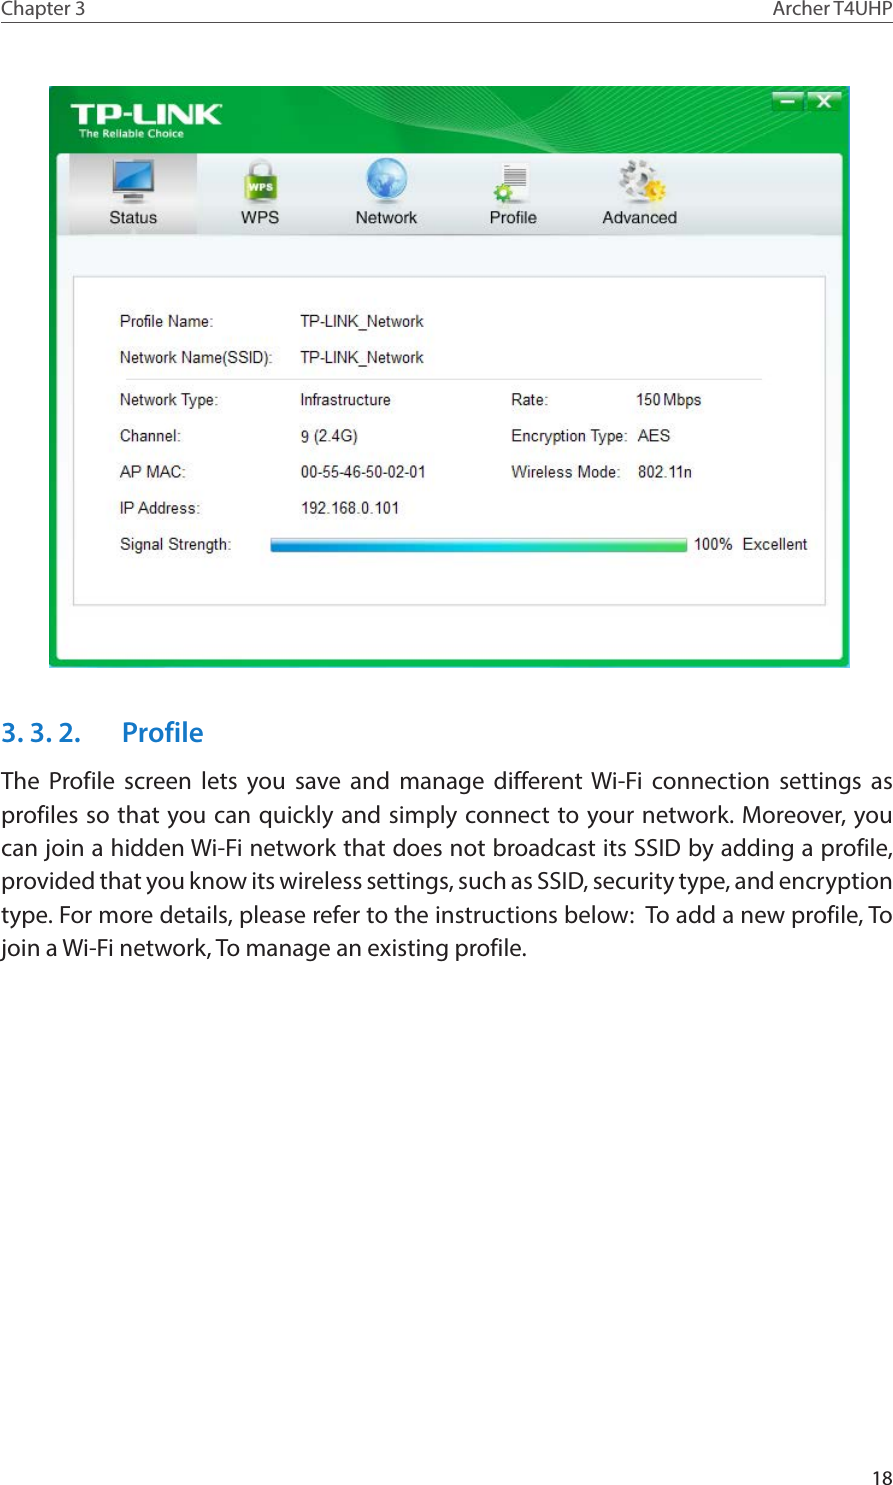 18Chapter 3 Archer T4UHP3. 3. 2.  ProfileThe Profile screen lets you save and manage different Wi-Fi connection settings as profiles so that you can quickly and simply connect to your network. Moreover, you can join a hidden Wi-Fi network that does not broadcast its SSID by adding a profile, provided that you know its wireless settings, such as SSID, security type, and encryption type. For more details, please refer to the instructions below:  To add a new profile, To join a Wi-Fi network, To manage an existing profile.